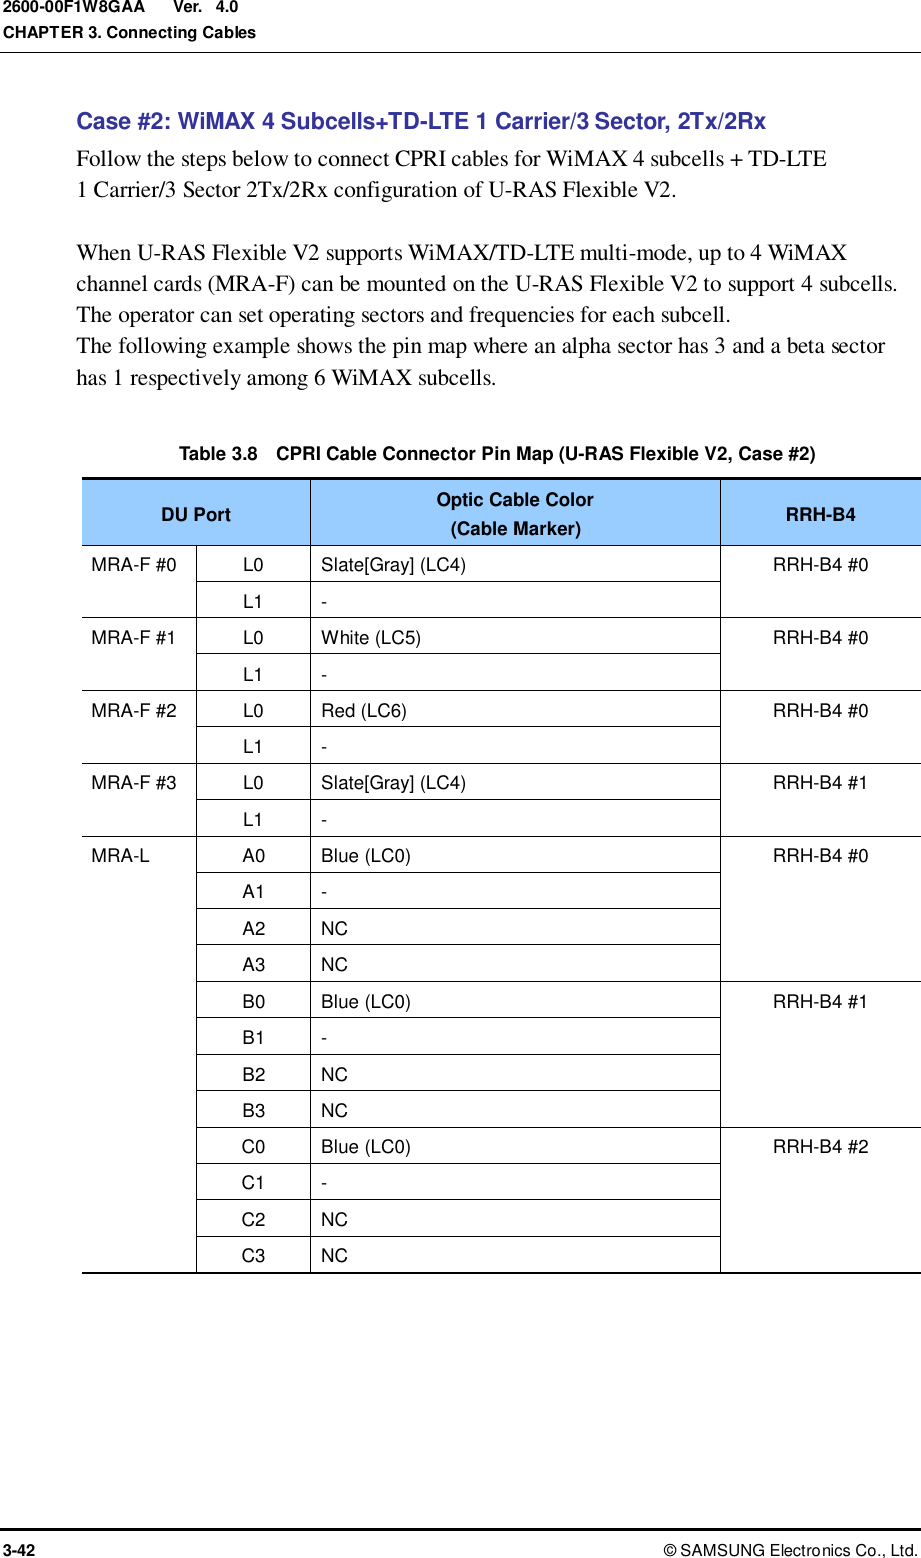  Ver.  CHAPTER 3. Connecting Cables 3-42 ©  SAMSUNG Electronics Co., Ltd. 2600-00F1W8GAA 4.0 Case #2: WiMAX 4 Subcells+TD-LTE 1 Carrier/3 Sector, 2Tx/2Rx Follow the steps below to connect CPRI cables for WiMAX 4 subcells + TD-LTE   1 Carrier/3 Sector 2Tx/2Rx configuration of U-RAS Flexible V2.  When U-RAS Flexible V2 supports WiMAX/TD-LTE multi-mode, up to 4 WiMAX channel cards (MRA-F) can be mounted on the U-RAS Flexible V2 to support 4 subcells. The operator can set operating sectors and frequencies for each subcell. The following example shows the pin map where an alpha sector has 3 and a beta sector has 1 respectively among 6 WiMAX subcells.  Table 3.8    CPRI Cable Connector Pin Map (U-RAS Flexible V2, Case #2) DU Port Optic Cable Color (Cable Marker) RRH-B4 MRA-F #0 L0 Slate[Gray] (LC4) RRH-B4 #0 L1 - MRA-F #1 L0 White (LC5) RRH-B4 #0 L1 - MRA-F #2 L0 Red (LC6) RRH-B4 #0 L1 - MRA-F #3 L0 Slate[Gray] (LC4) RRH-B4 #1 L1 - MRA-L A0 Blue (LC0) RRH-B4 #0 A1 - A2 NC A3 NC B0 Blue (LC0) RRH-B4 #1 B1 - B2 NC B3 NC C0 Blue (LC0) RRH-B4 #2 C1 - C2 NC C3 NC  